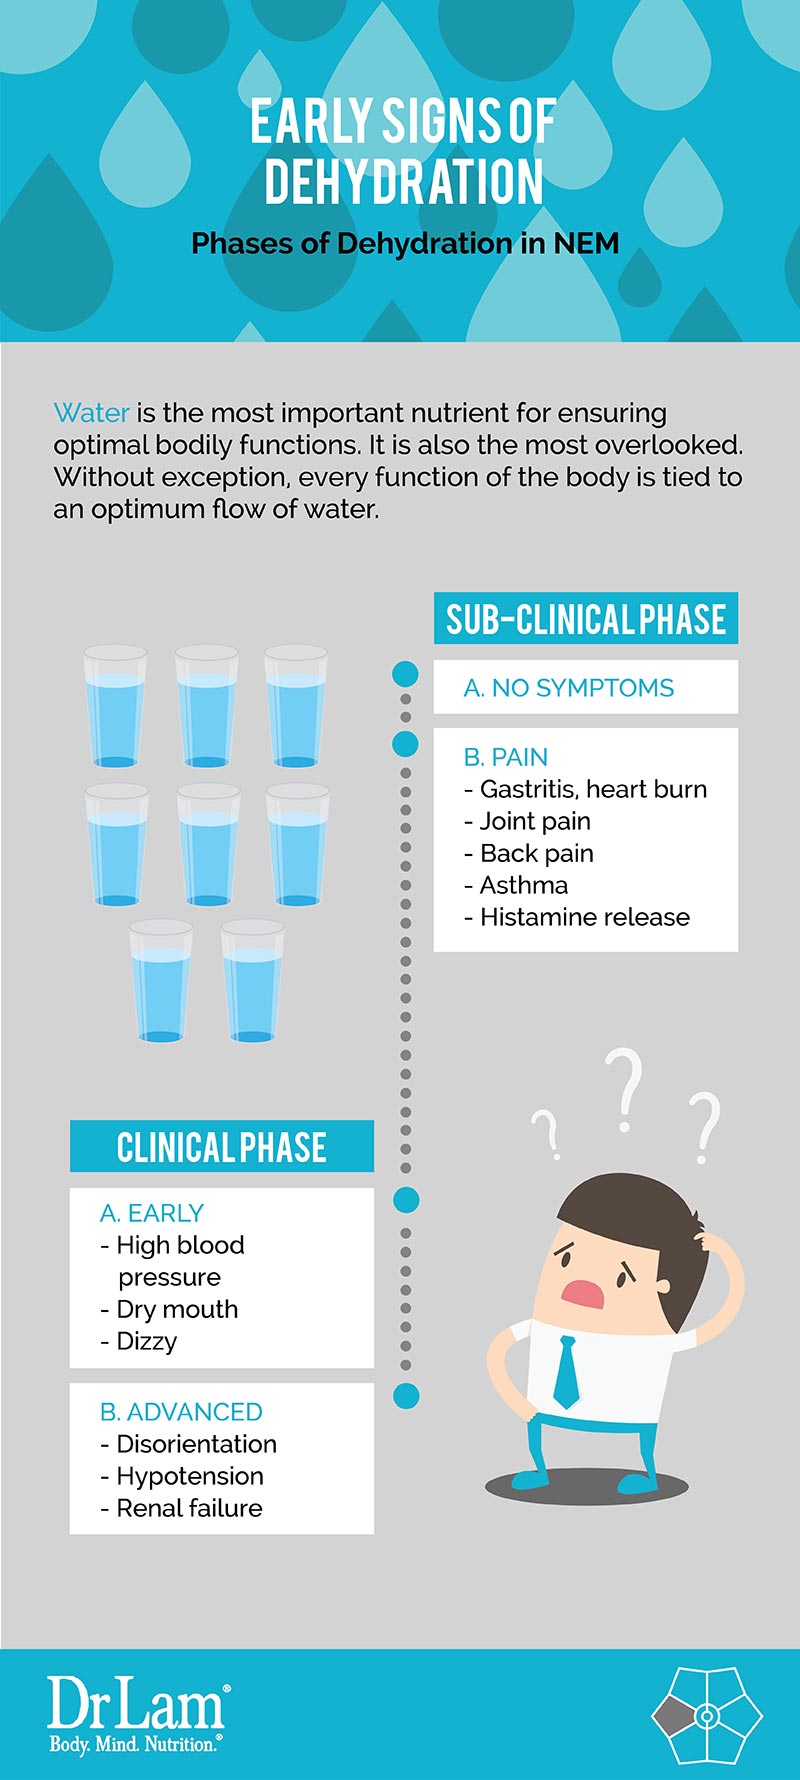 Knowing the Early Signs of Dehydration is Important to Fatigue